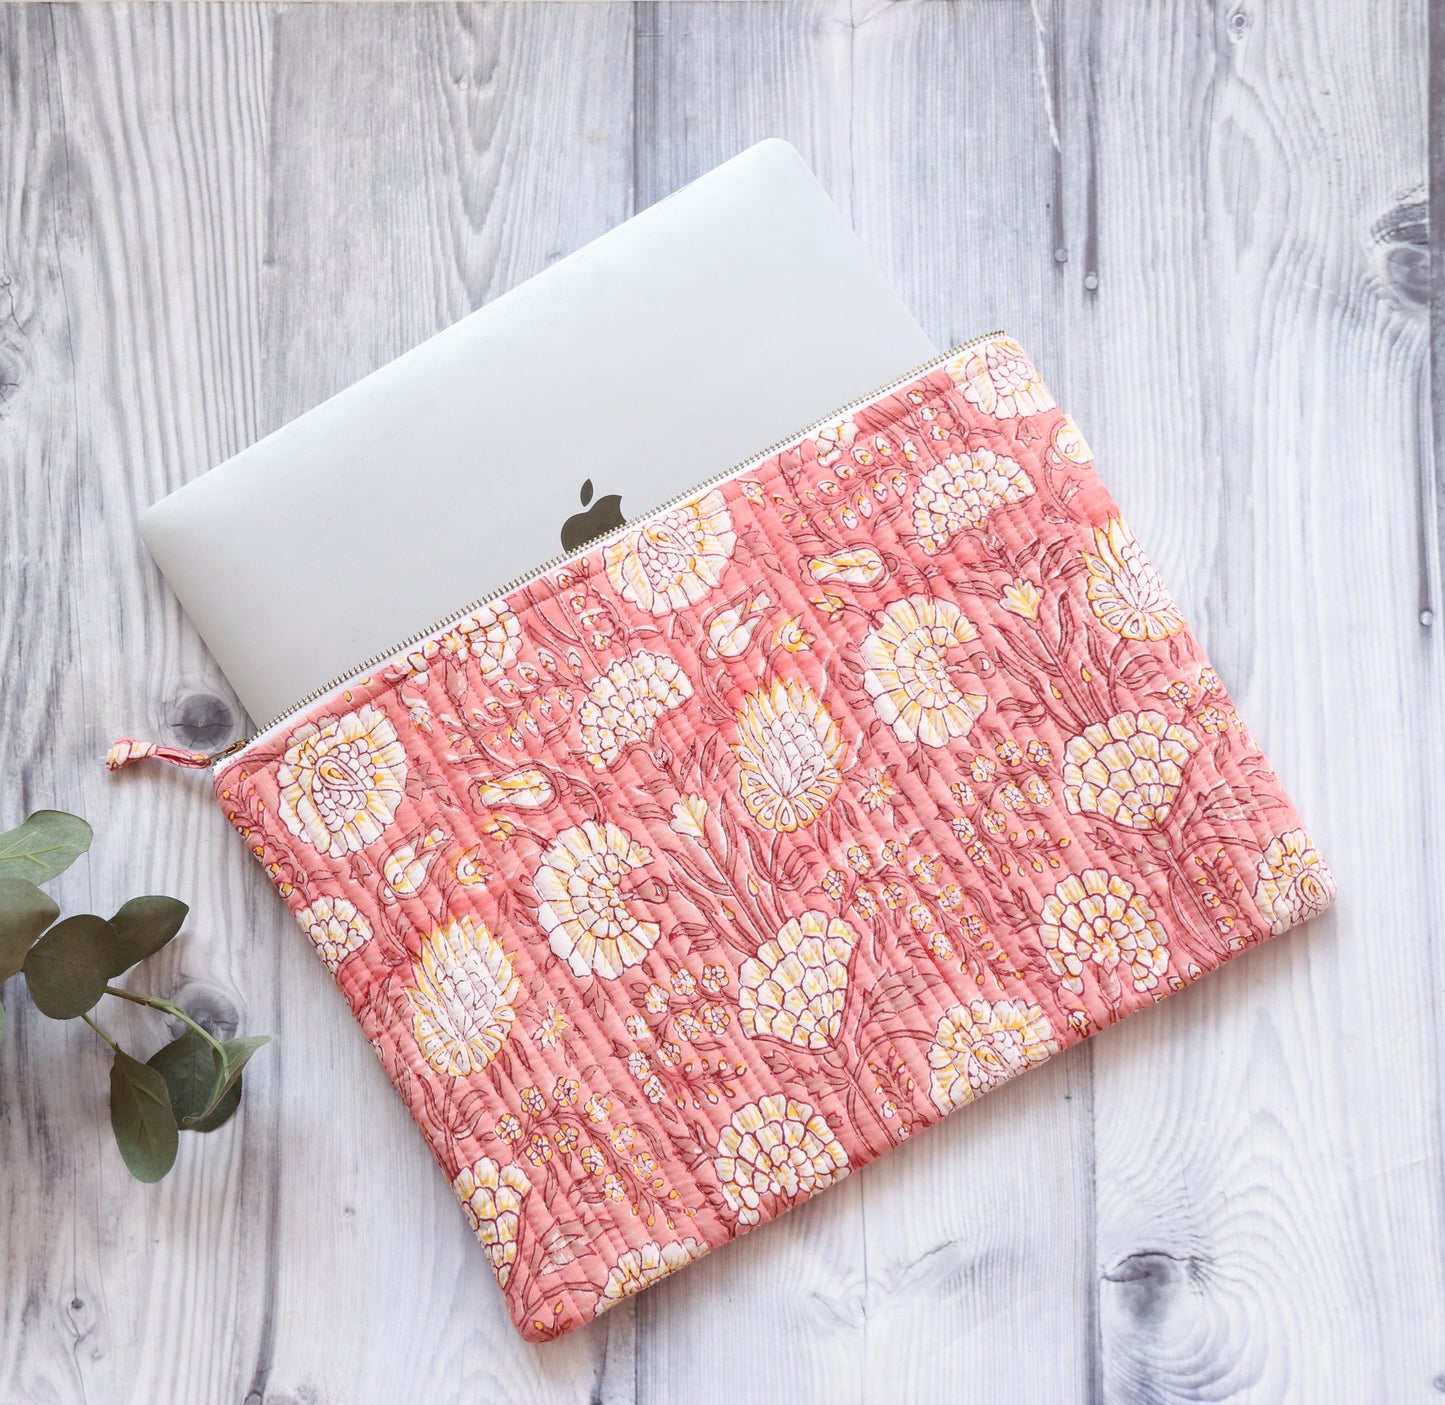 Block print Laptop sleeves - Laptop cover - Peach floral - 13 inch, 14 inch & 15 inch